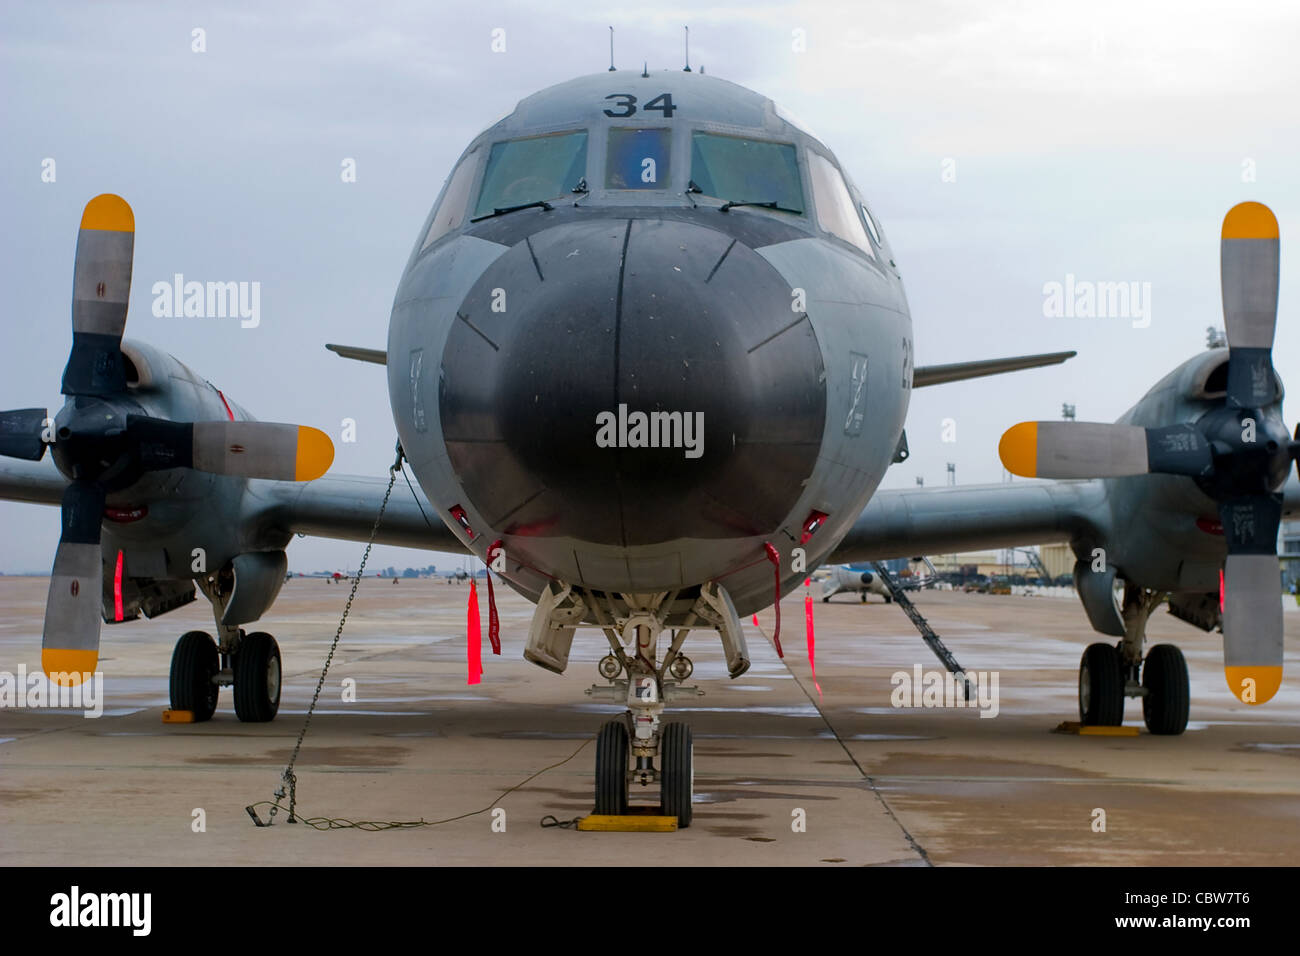 Military aircraft assigned to the combat and other warlike functions Stock Photo